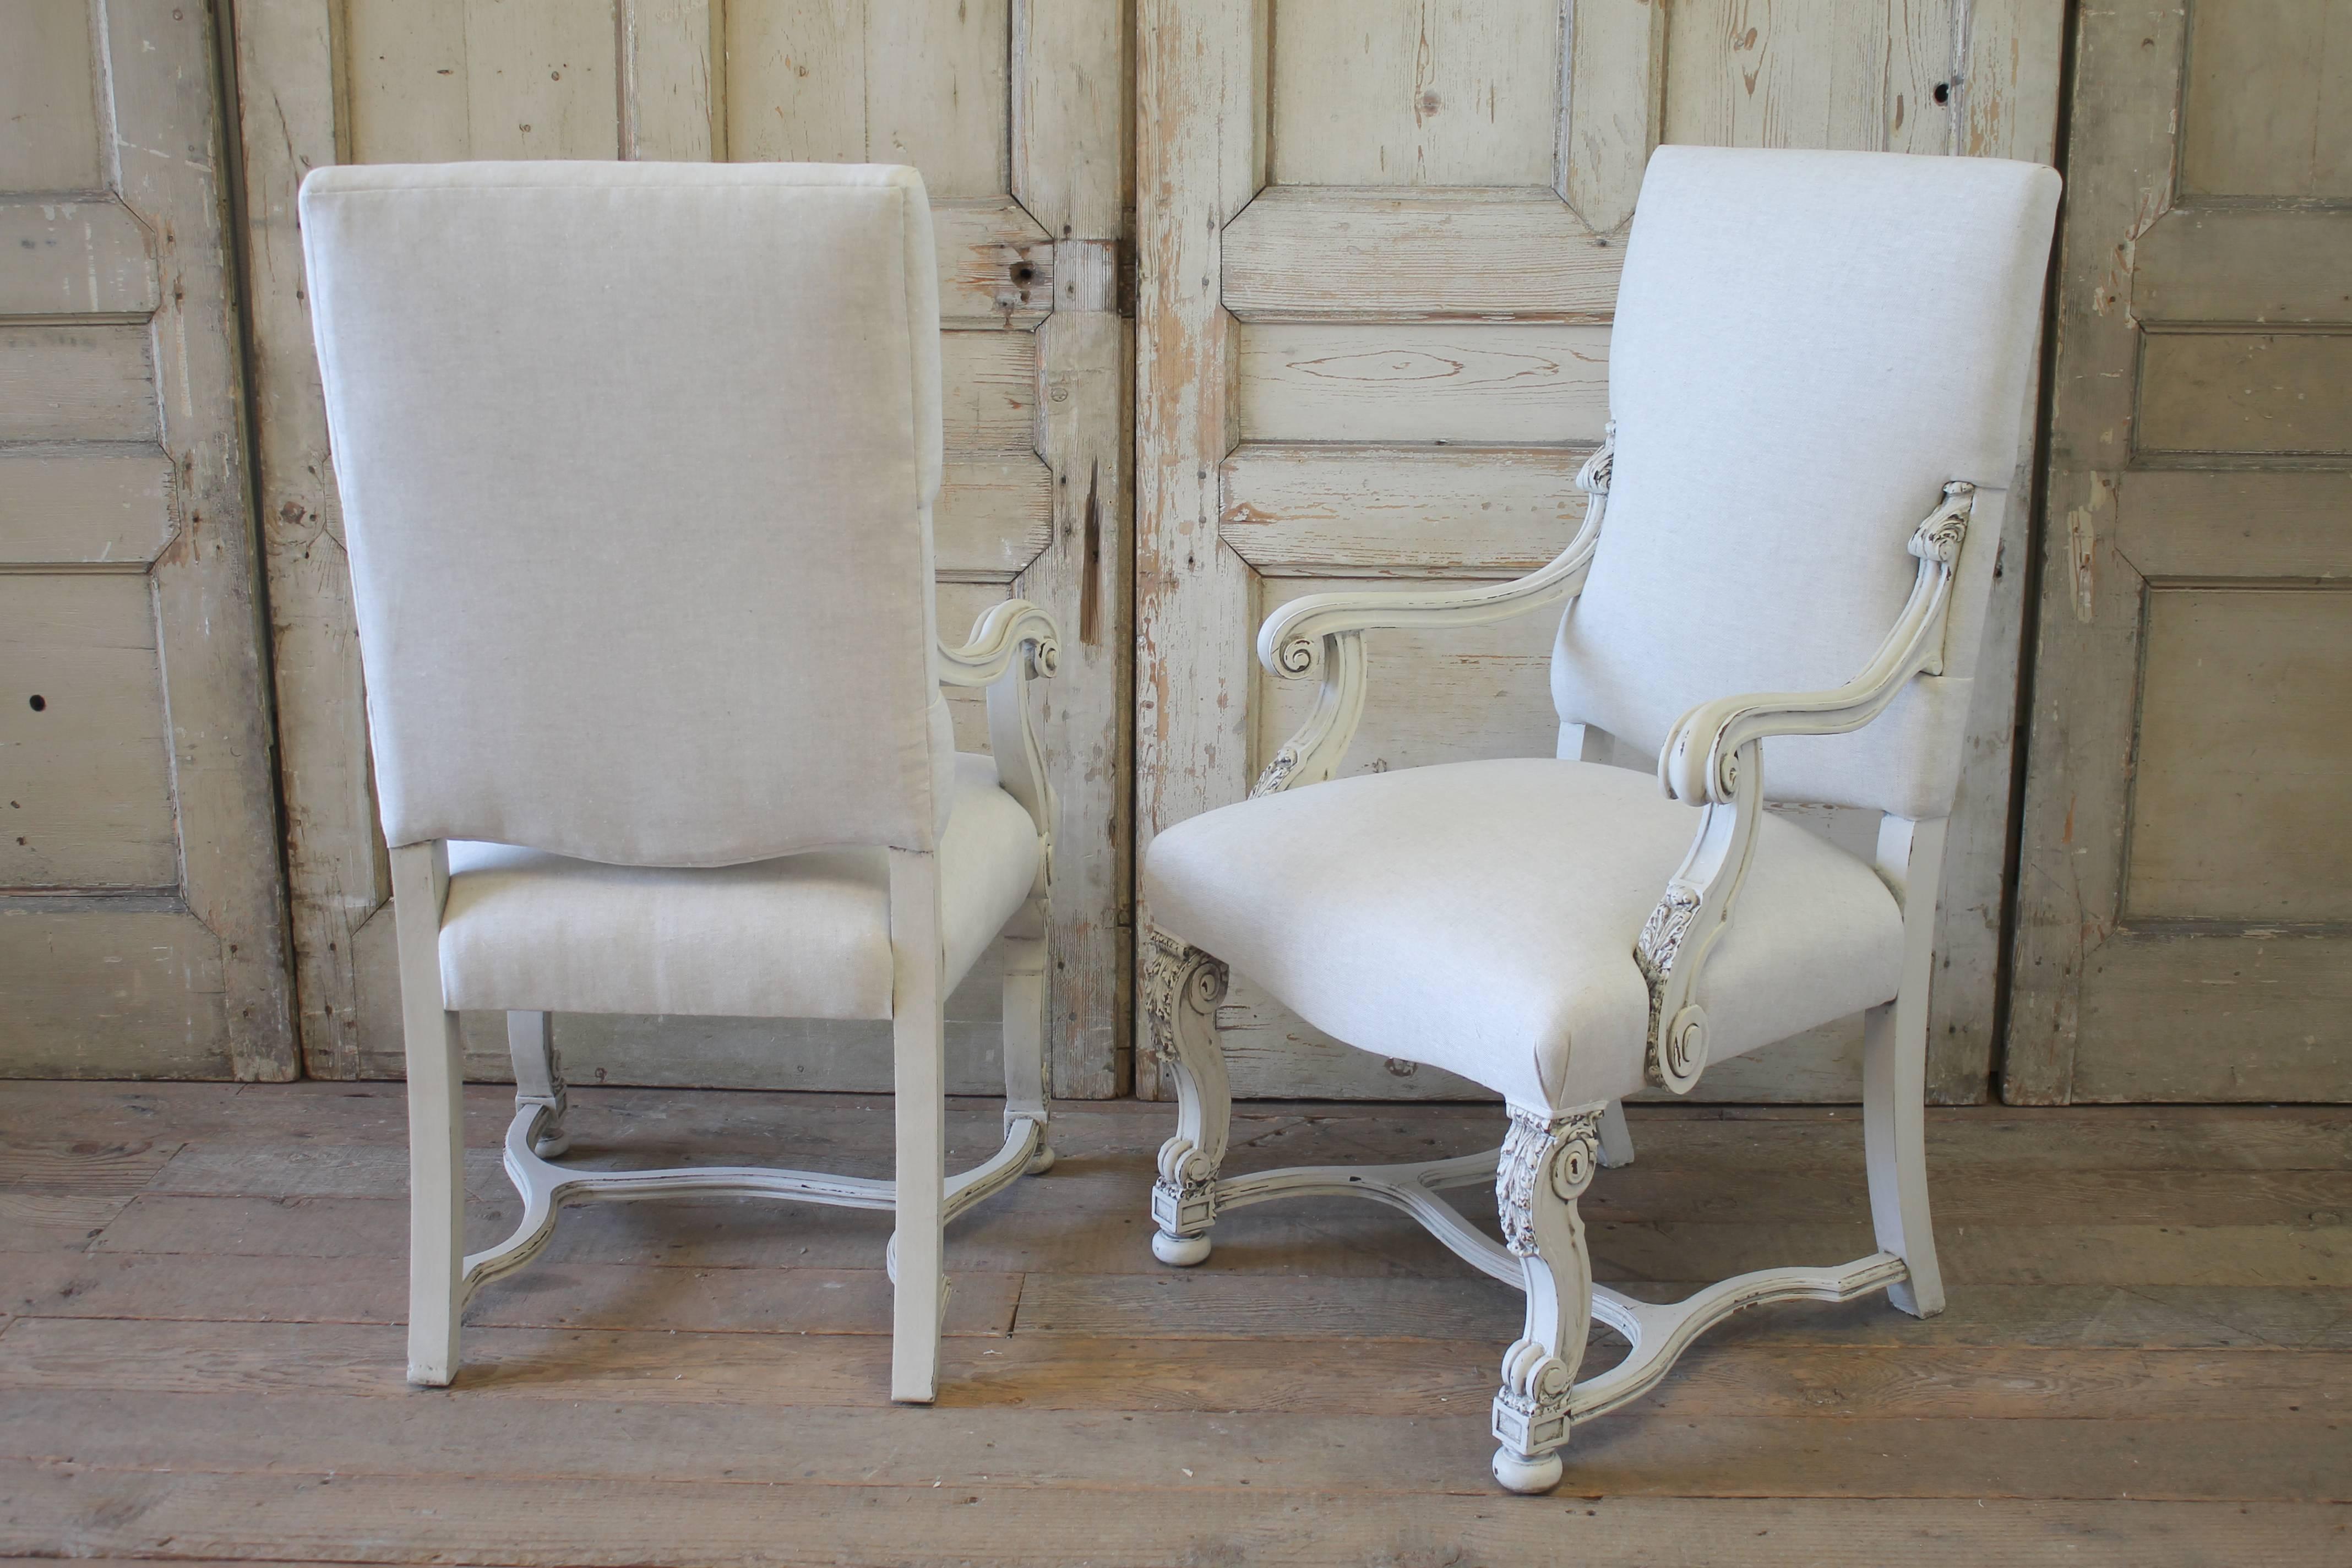 Beautifully upholstered Renaissance Revival dining chairs with delicate trim detail. This set includes six side chairs and two armchairs. Upholstered in a greige natural linen, color is oatmeal that leans more towards the grey side. You can linger